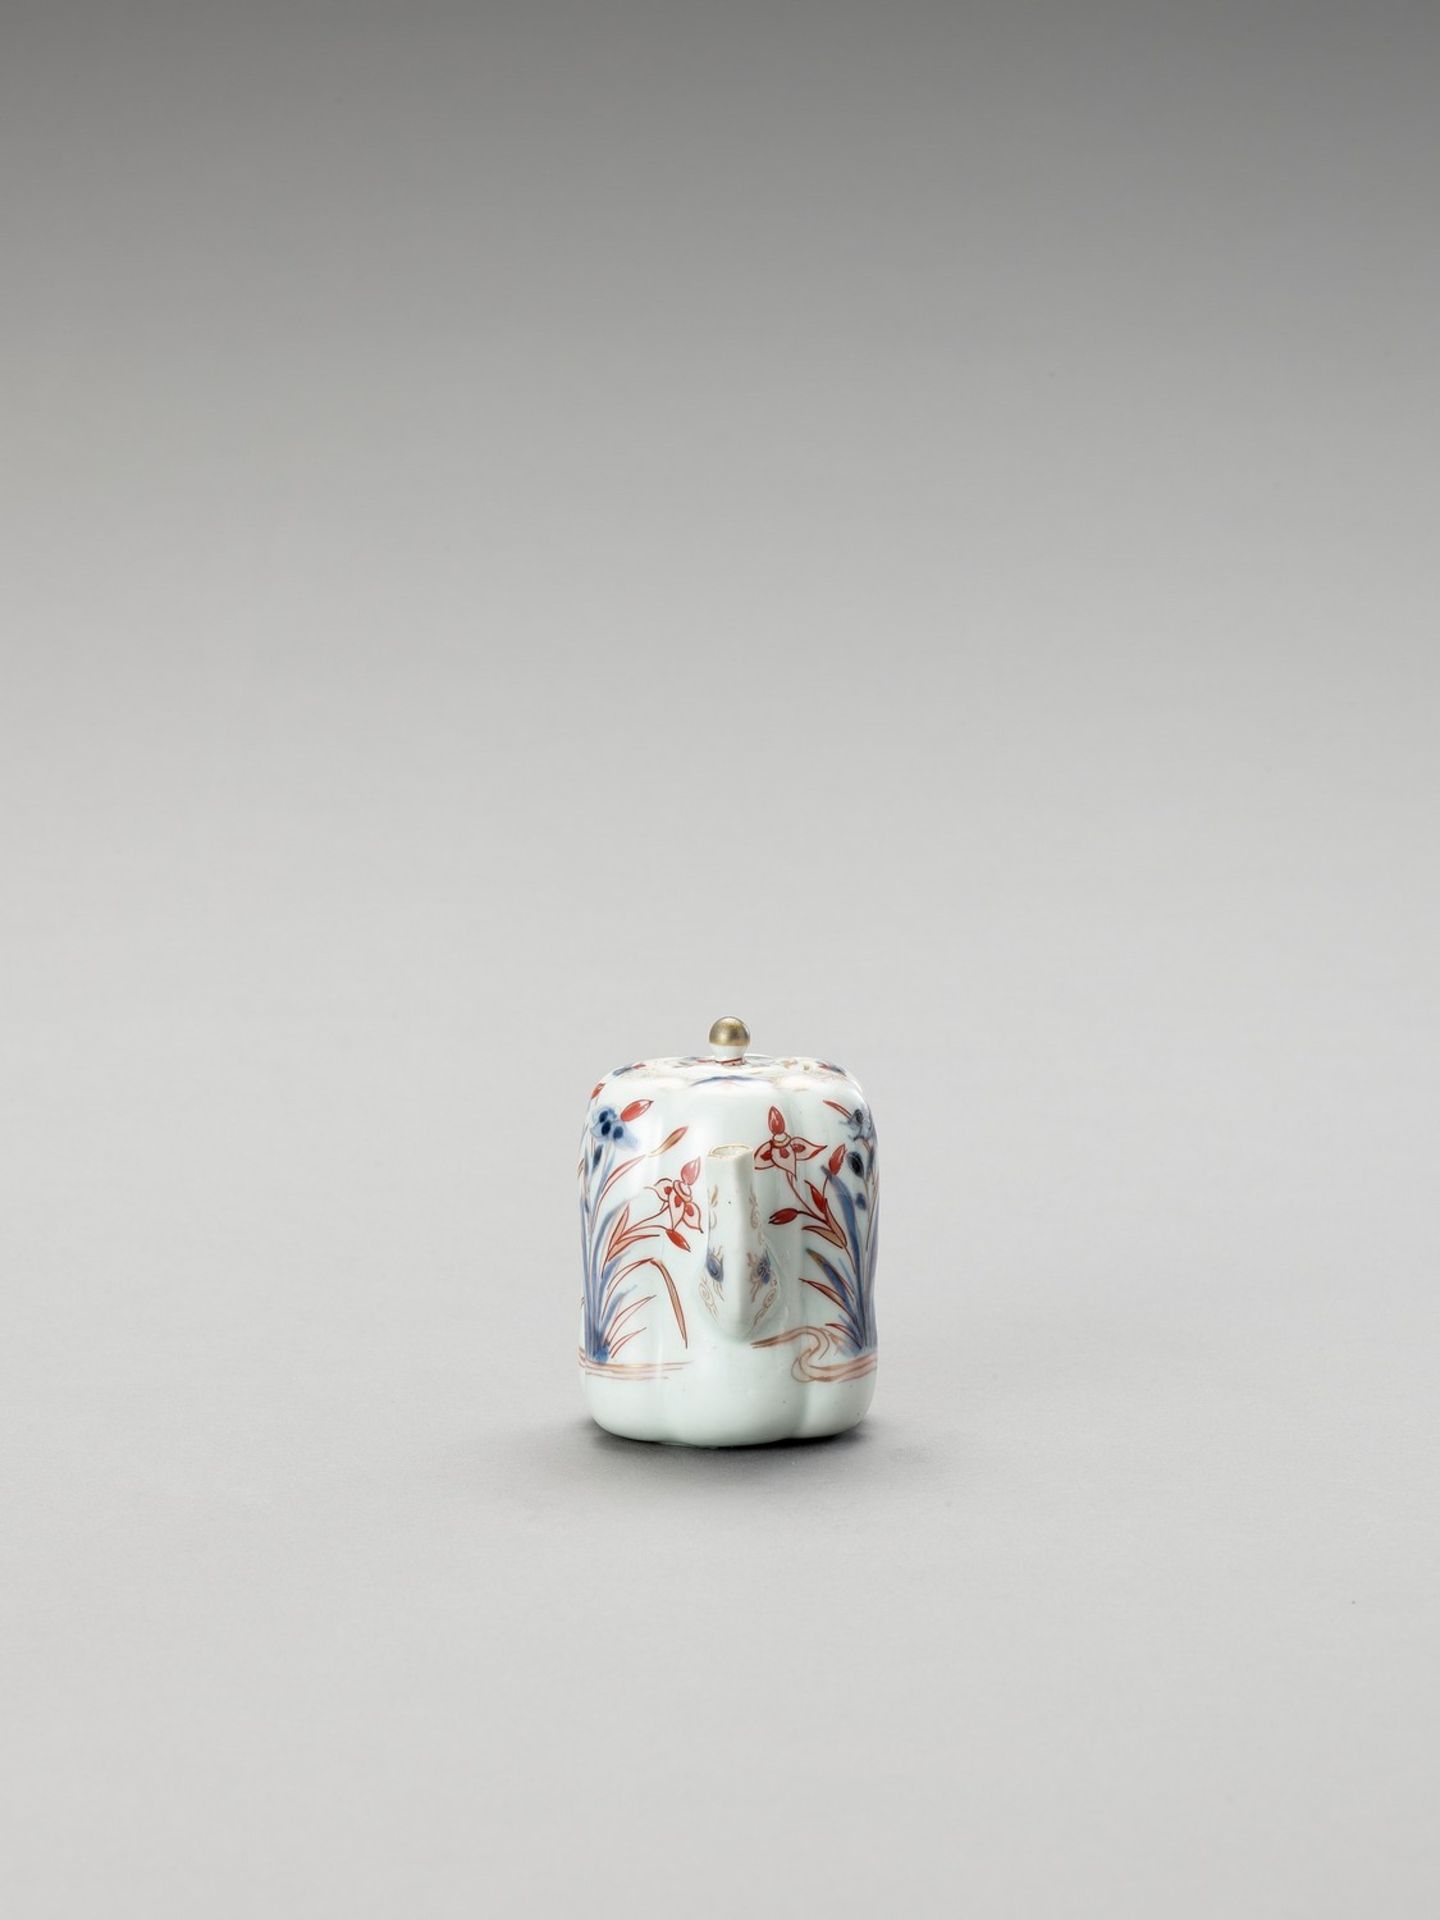 AN IMARI PORCELAIN TEAPOT WITH COVER - Image 2 of 6